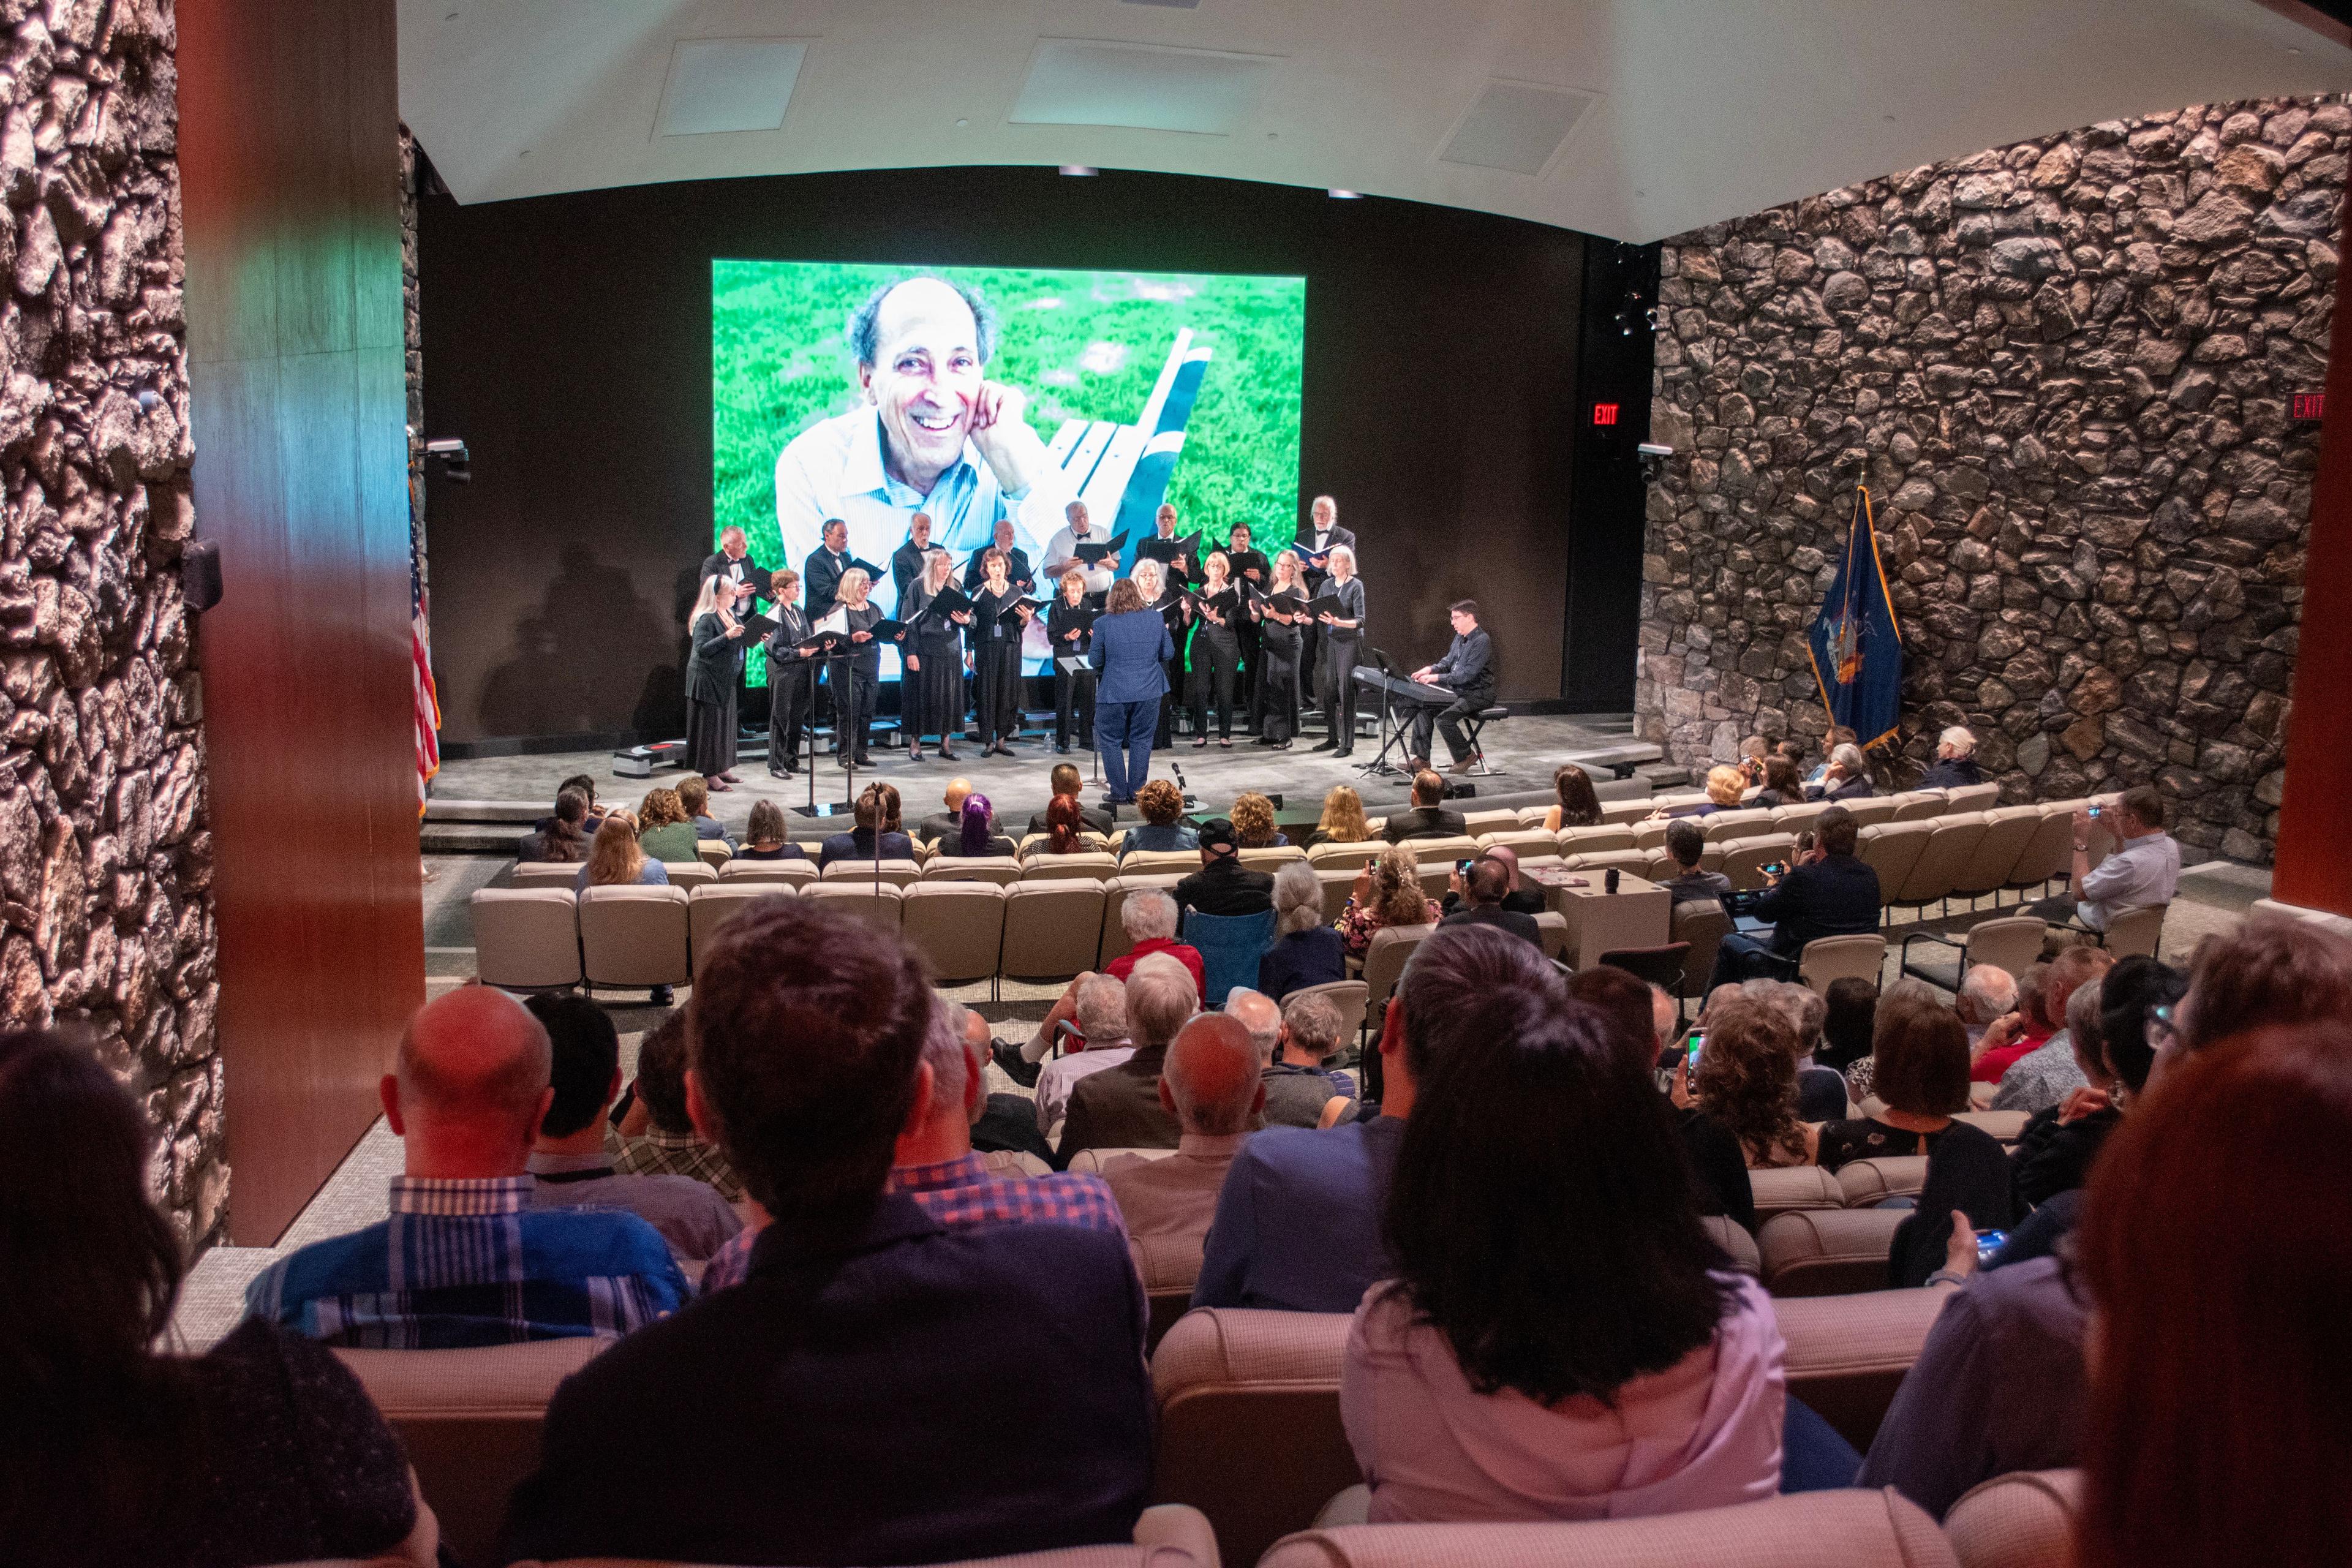 The Taghkanic Chorale, seen here performing at Bob Dennard's memorial service, was one of his great passions outside of the lab.